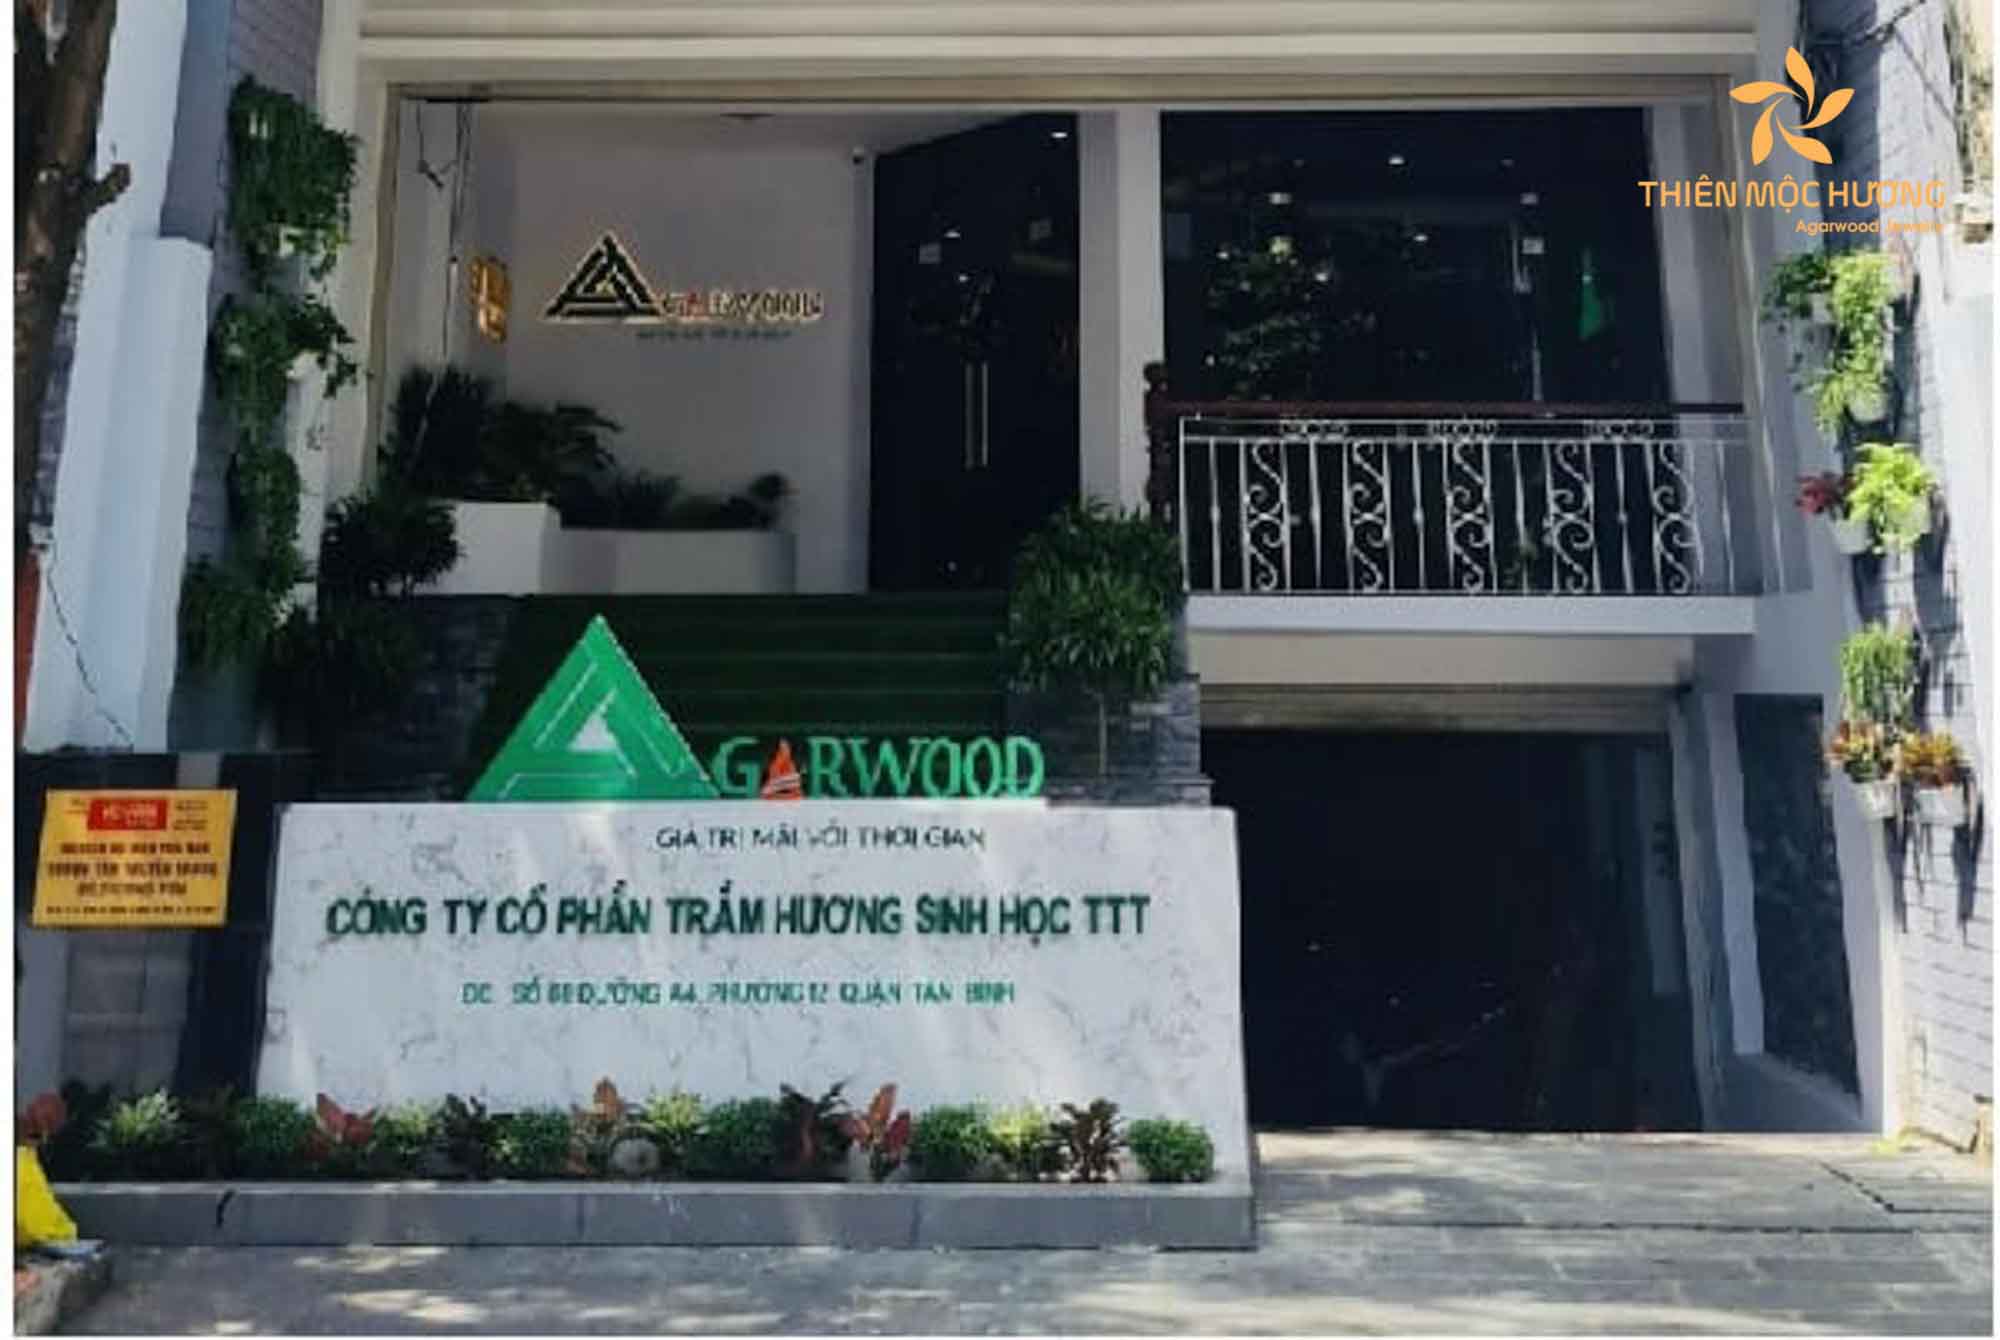 Agarwood Production and Service Joint Stock Company